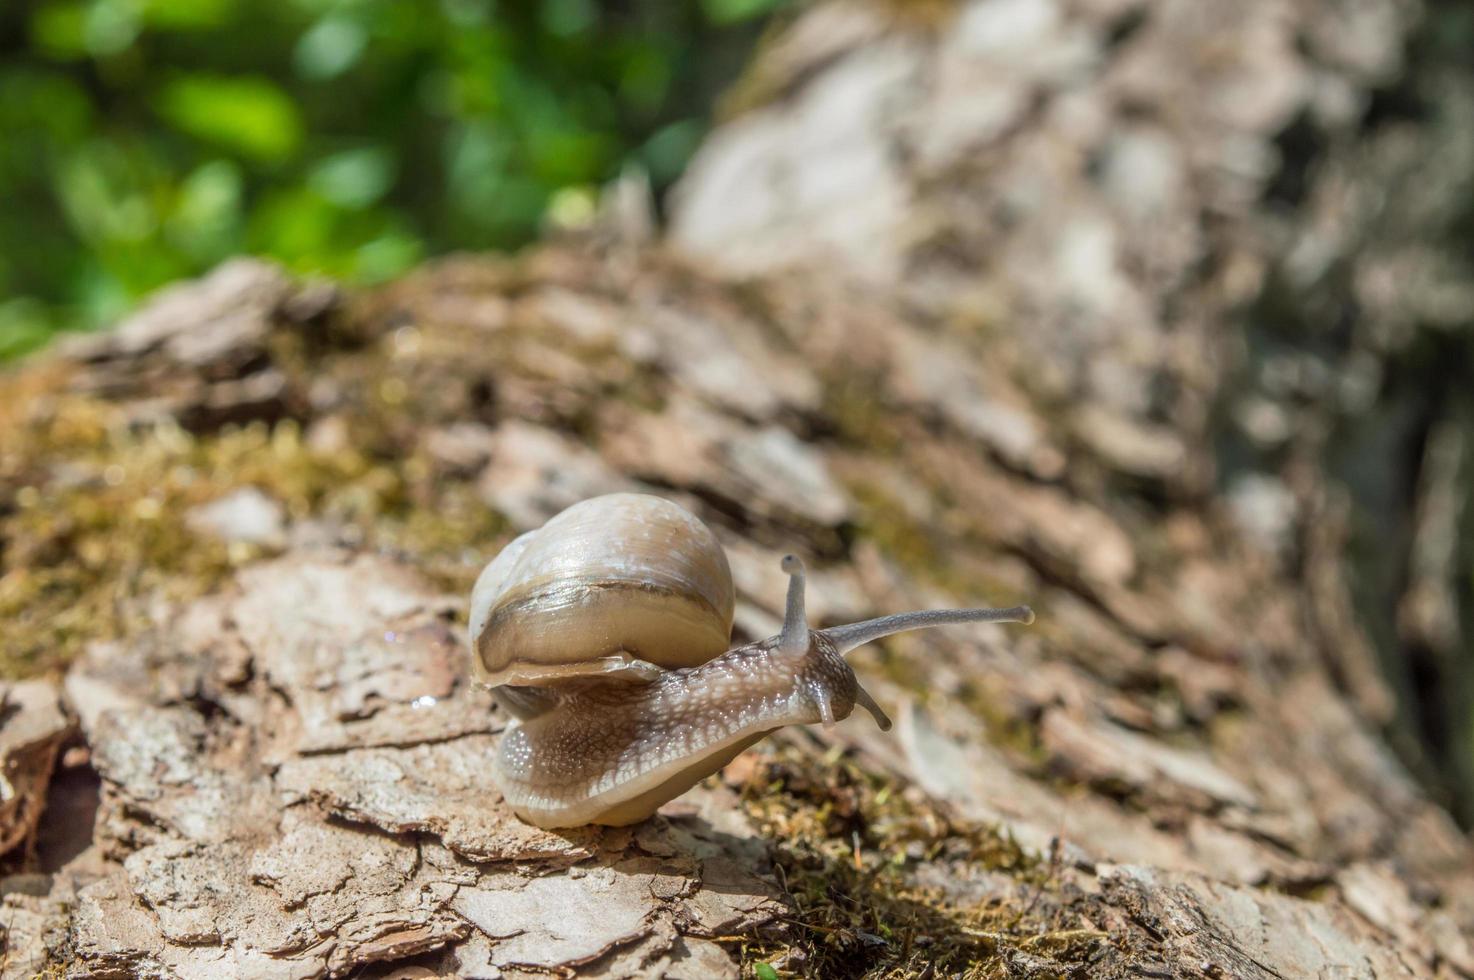 Wild little snail closeup in the green forest with blurred background photo